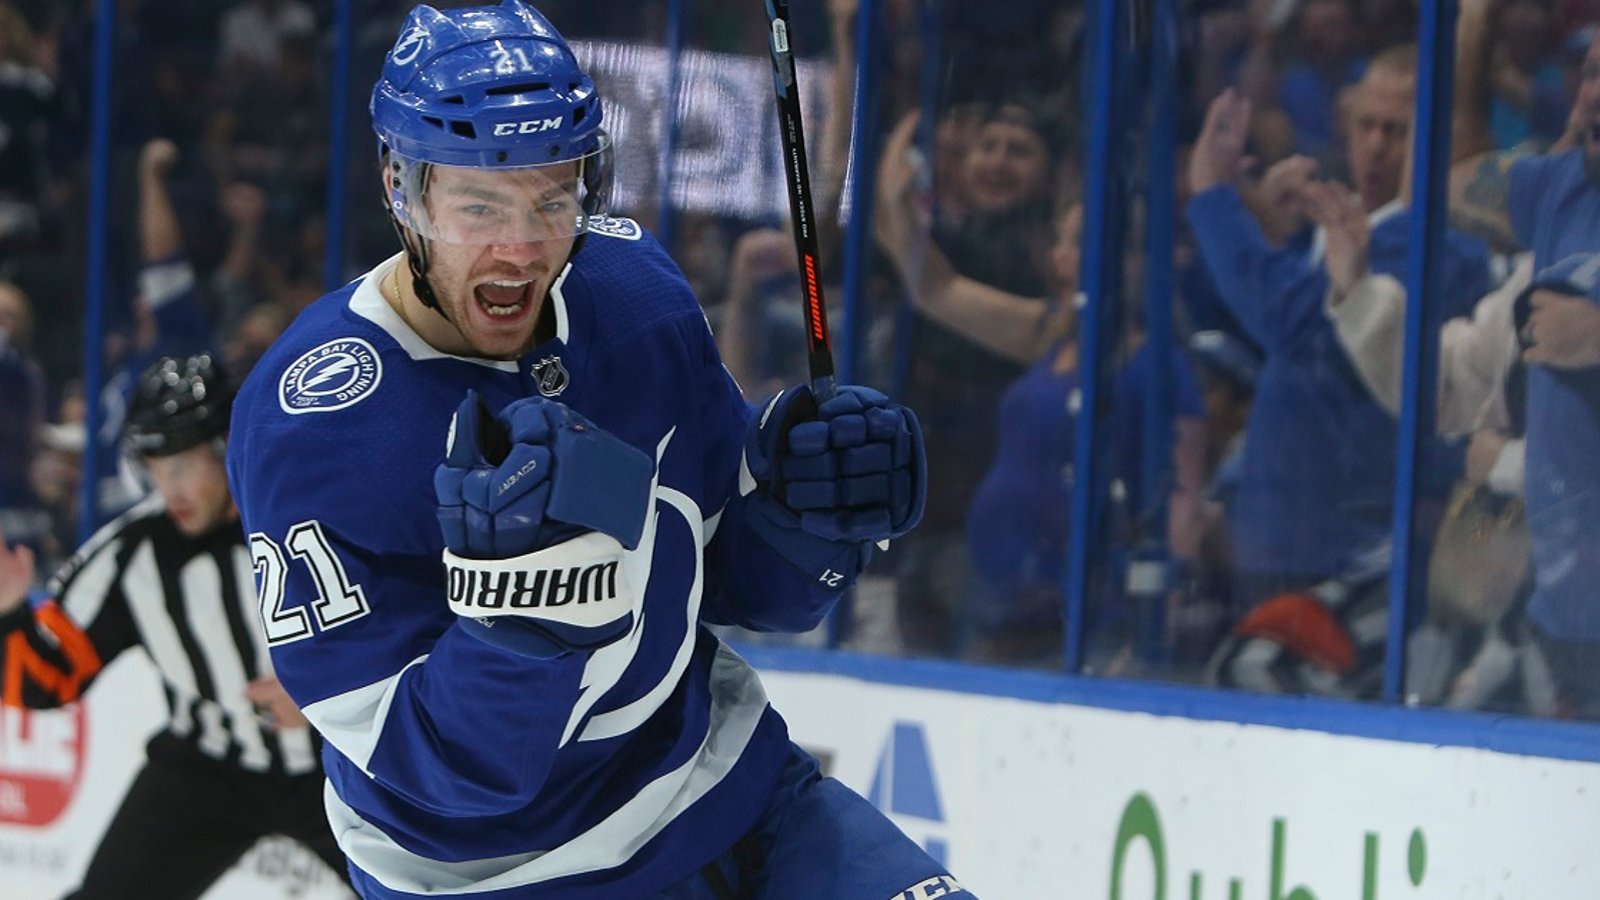 Lightning smash an NHL record and top it off by smashing a franchise record as well.